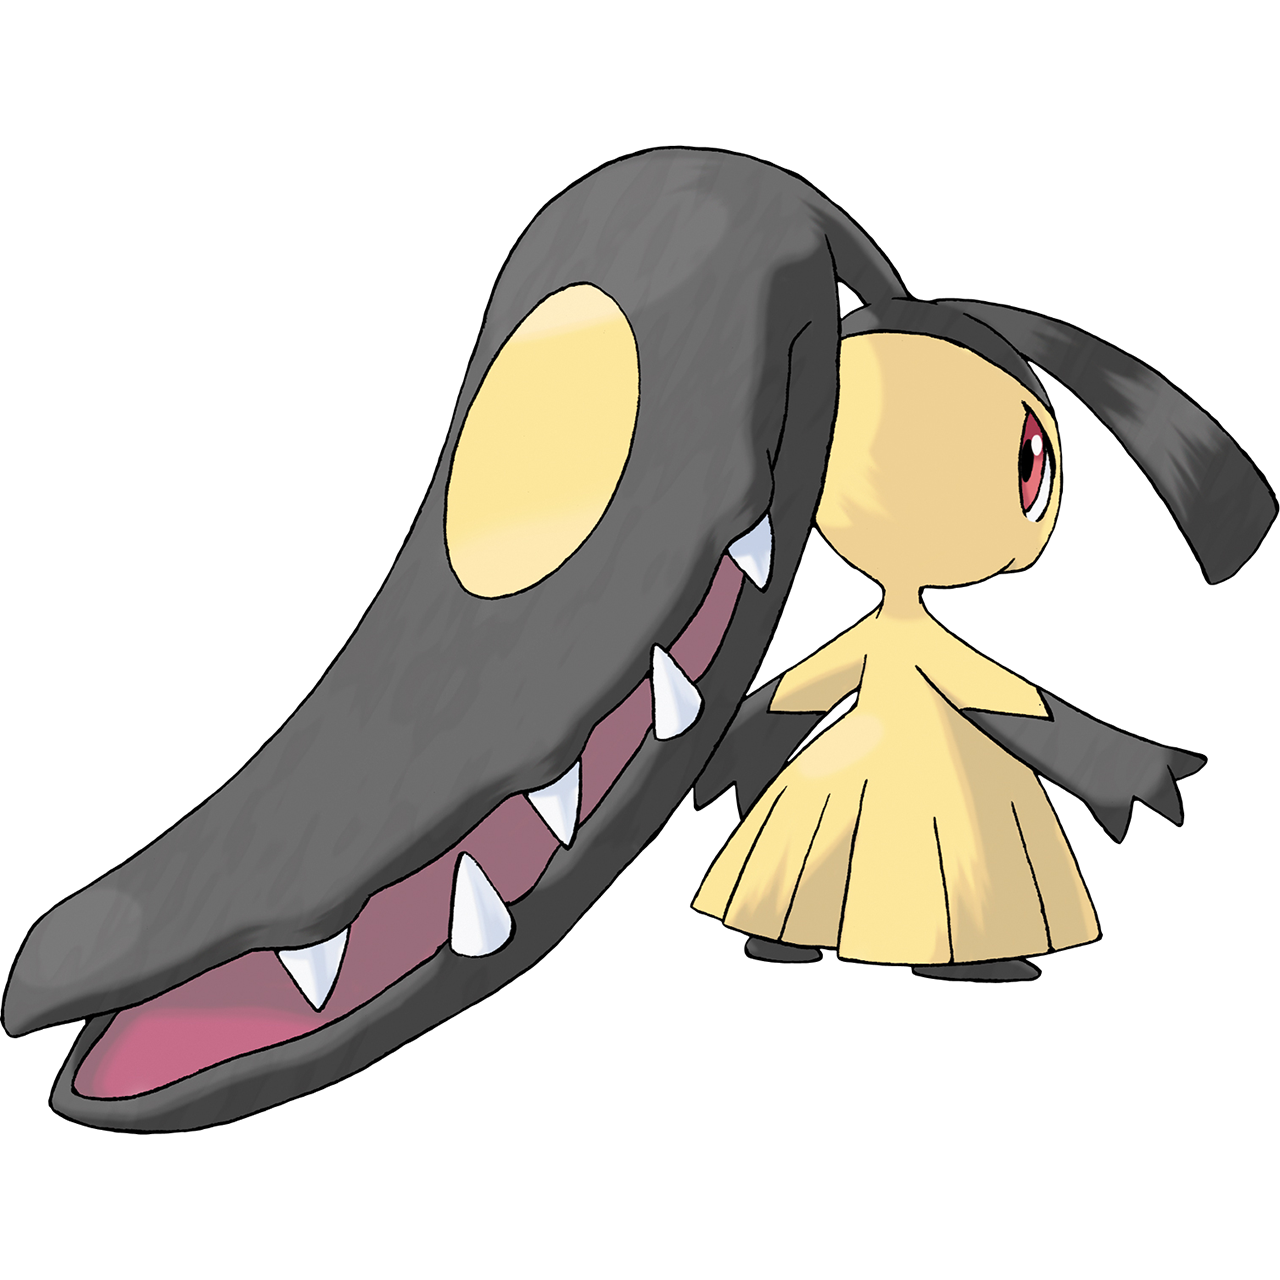 Ampharos, Absol, and Mawile join Pokémon X & Y's Mega Evolution